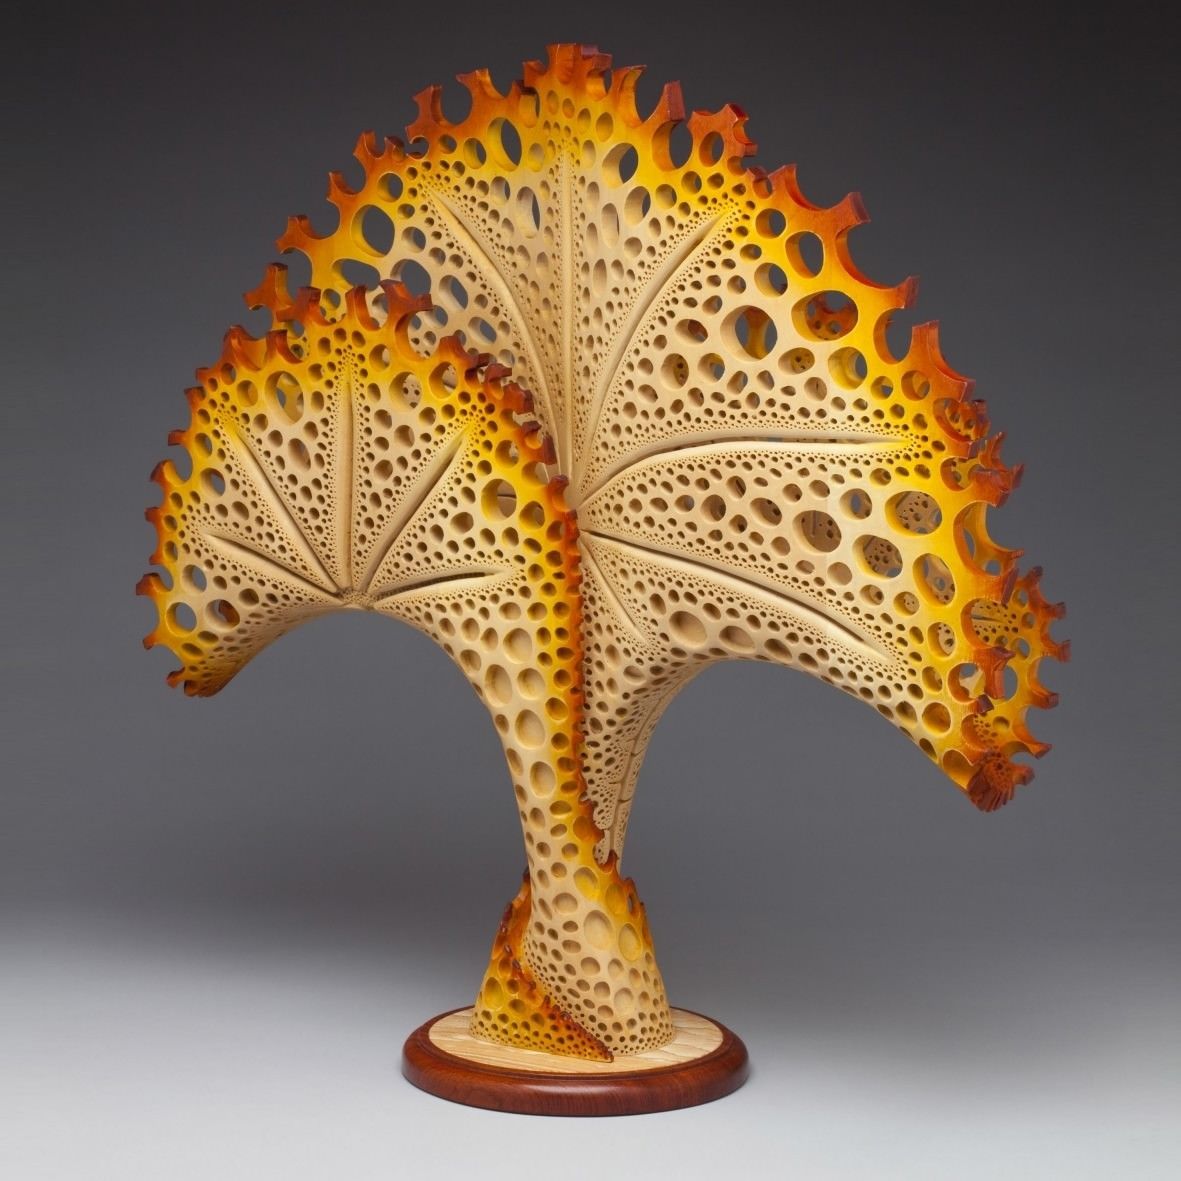 Hand Made Free-Standing Wood Sculpture Coral Reef by Mark Doolittle  Studio